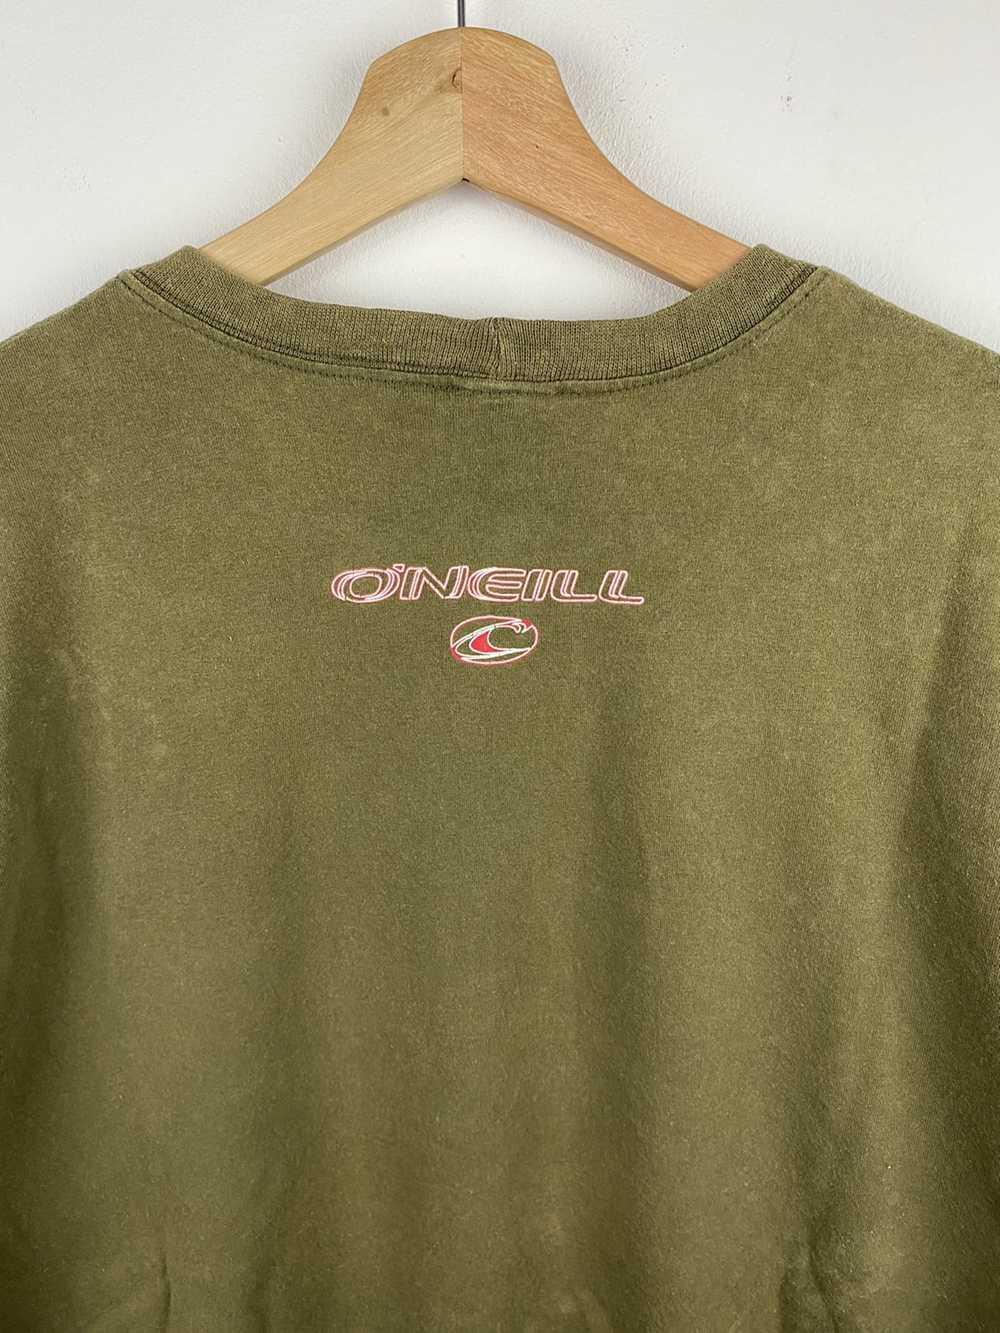 Oneill × Surf Style × Vintage Vintage Oneill Surf - image 5